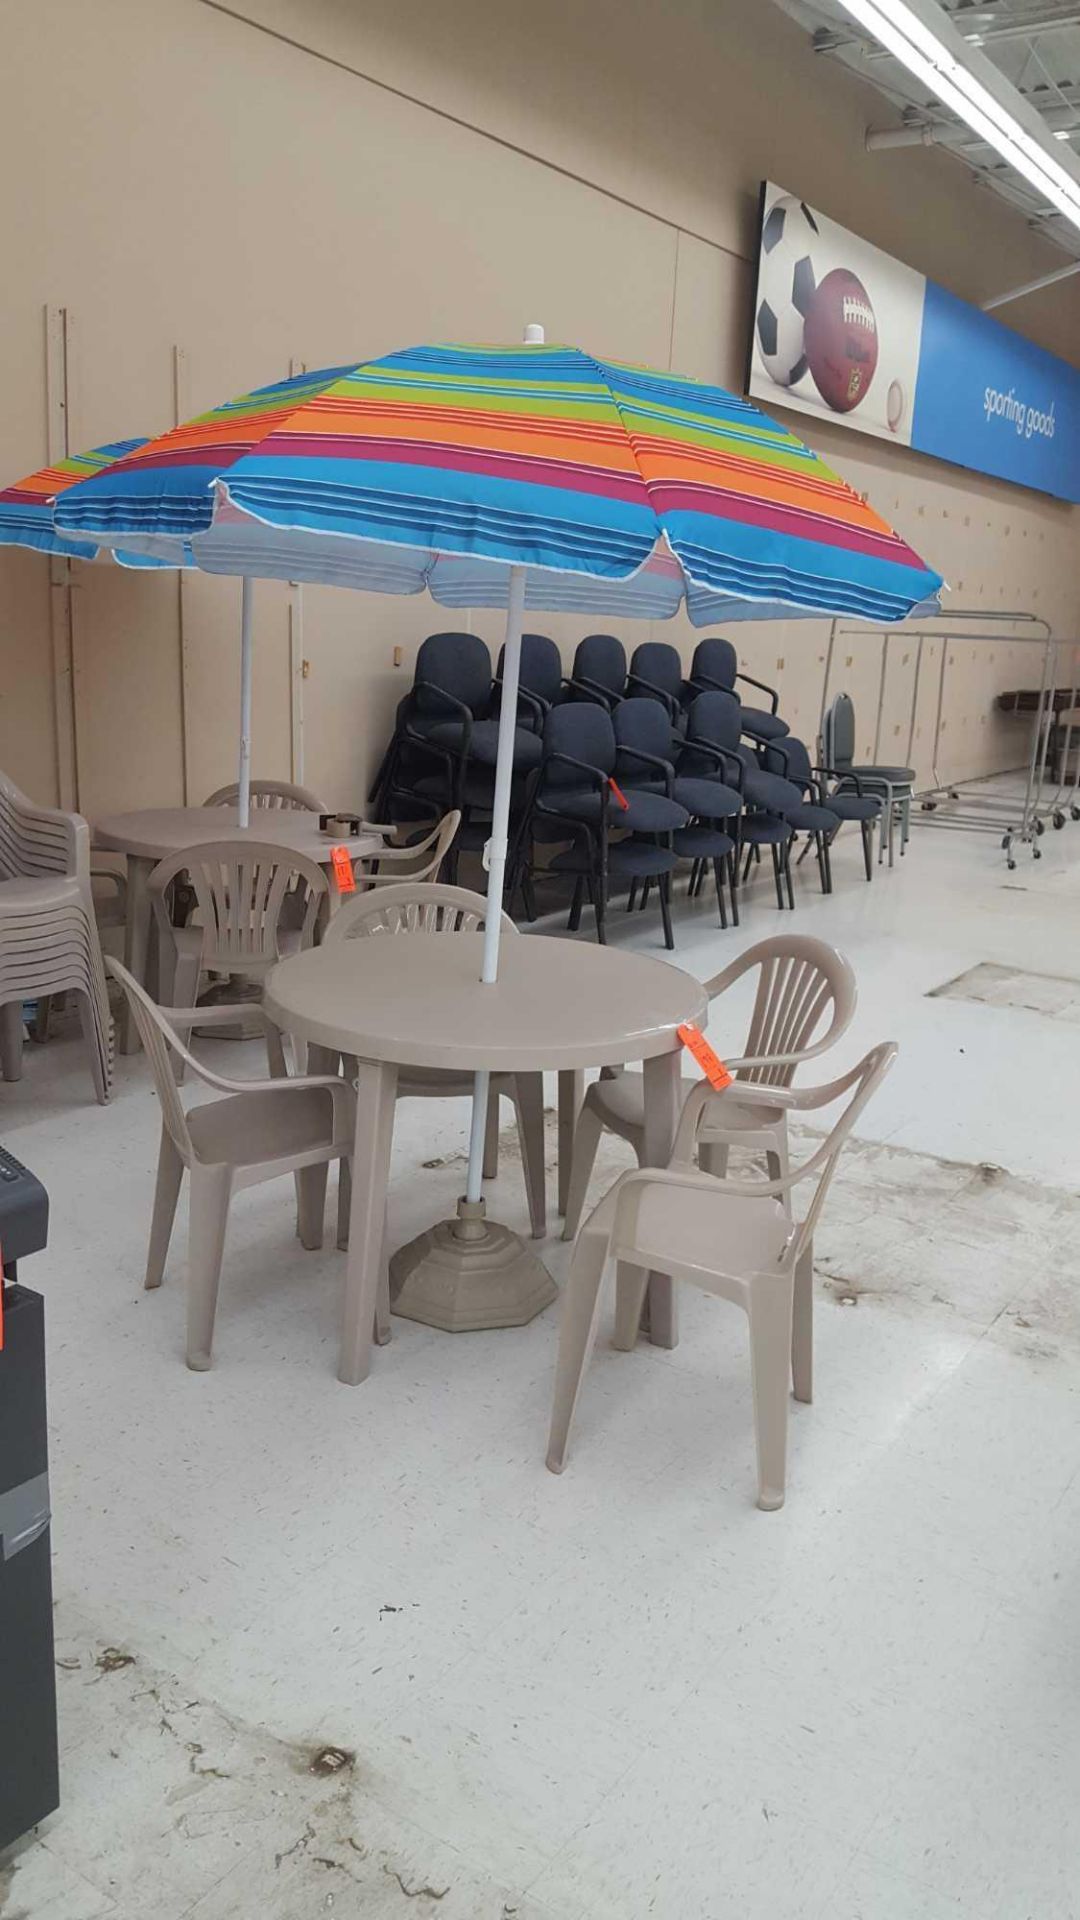 Patio furniture lot - includes (1) resin table, (4) resin stacking chairs, umbrella, and umbrella